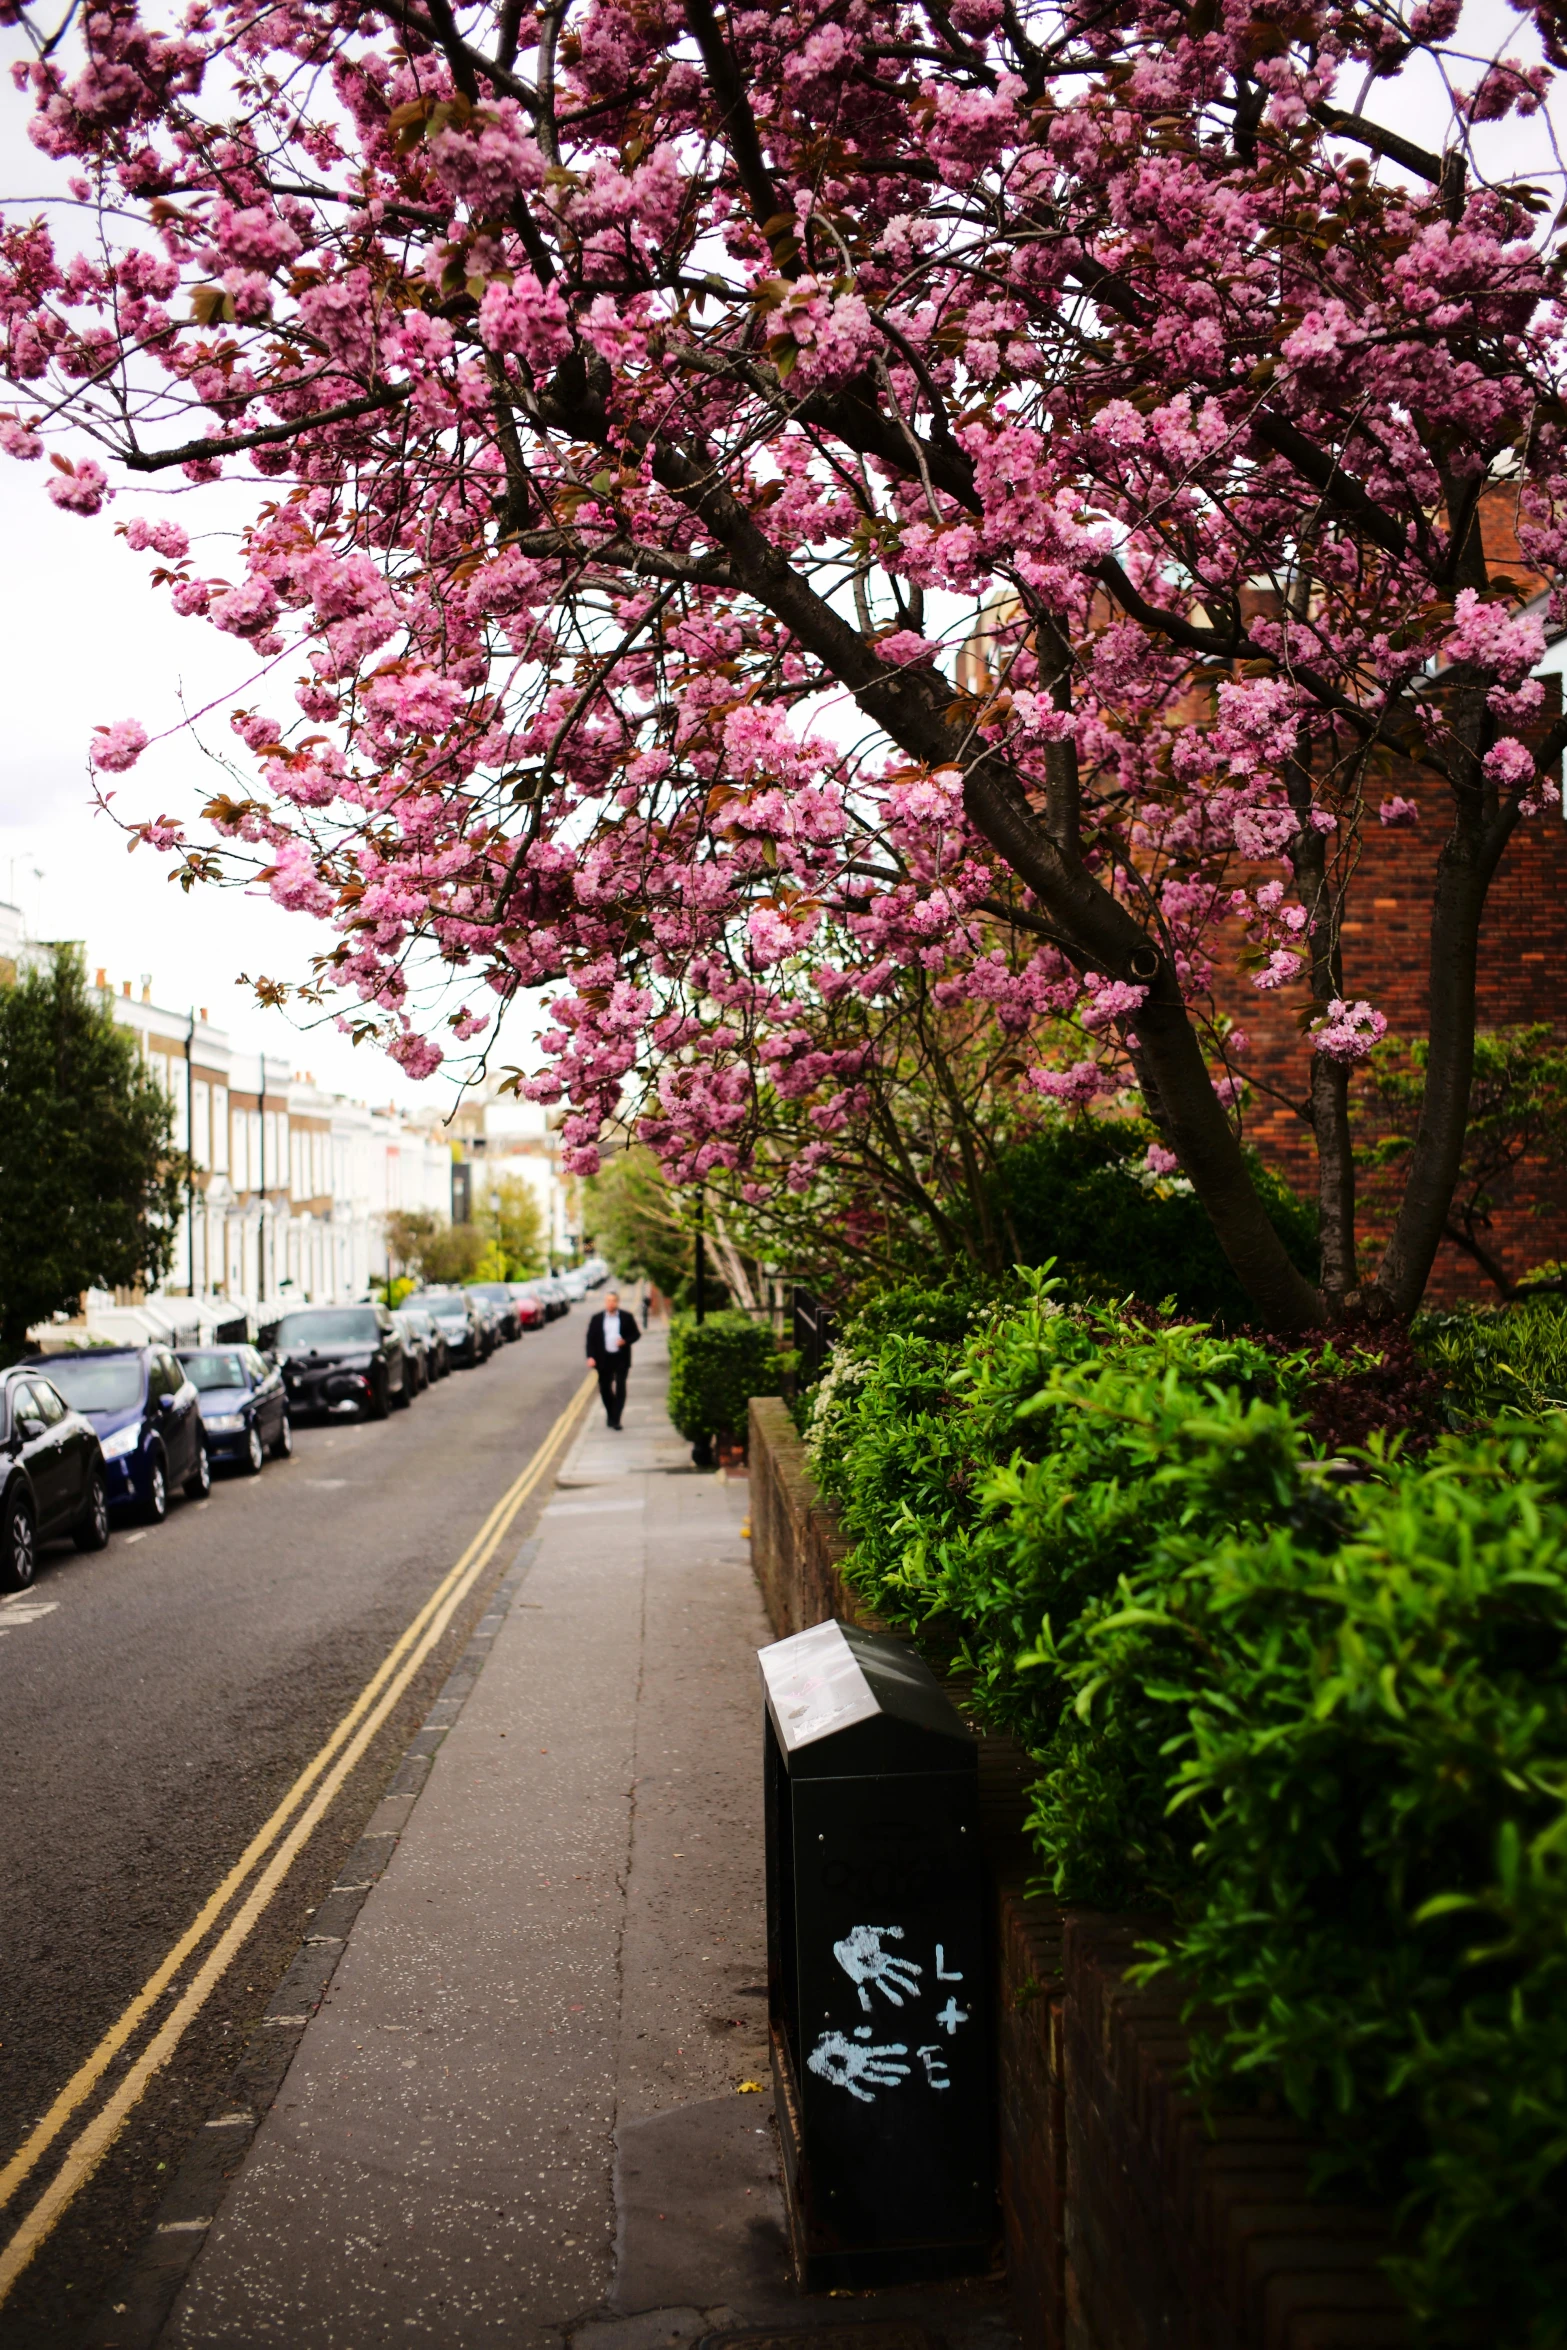 a woman walking her dog on the sidewalk in front of some pink flowers